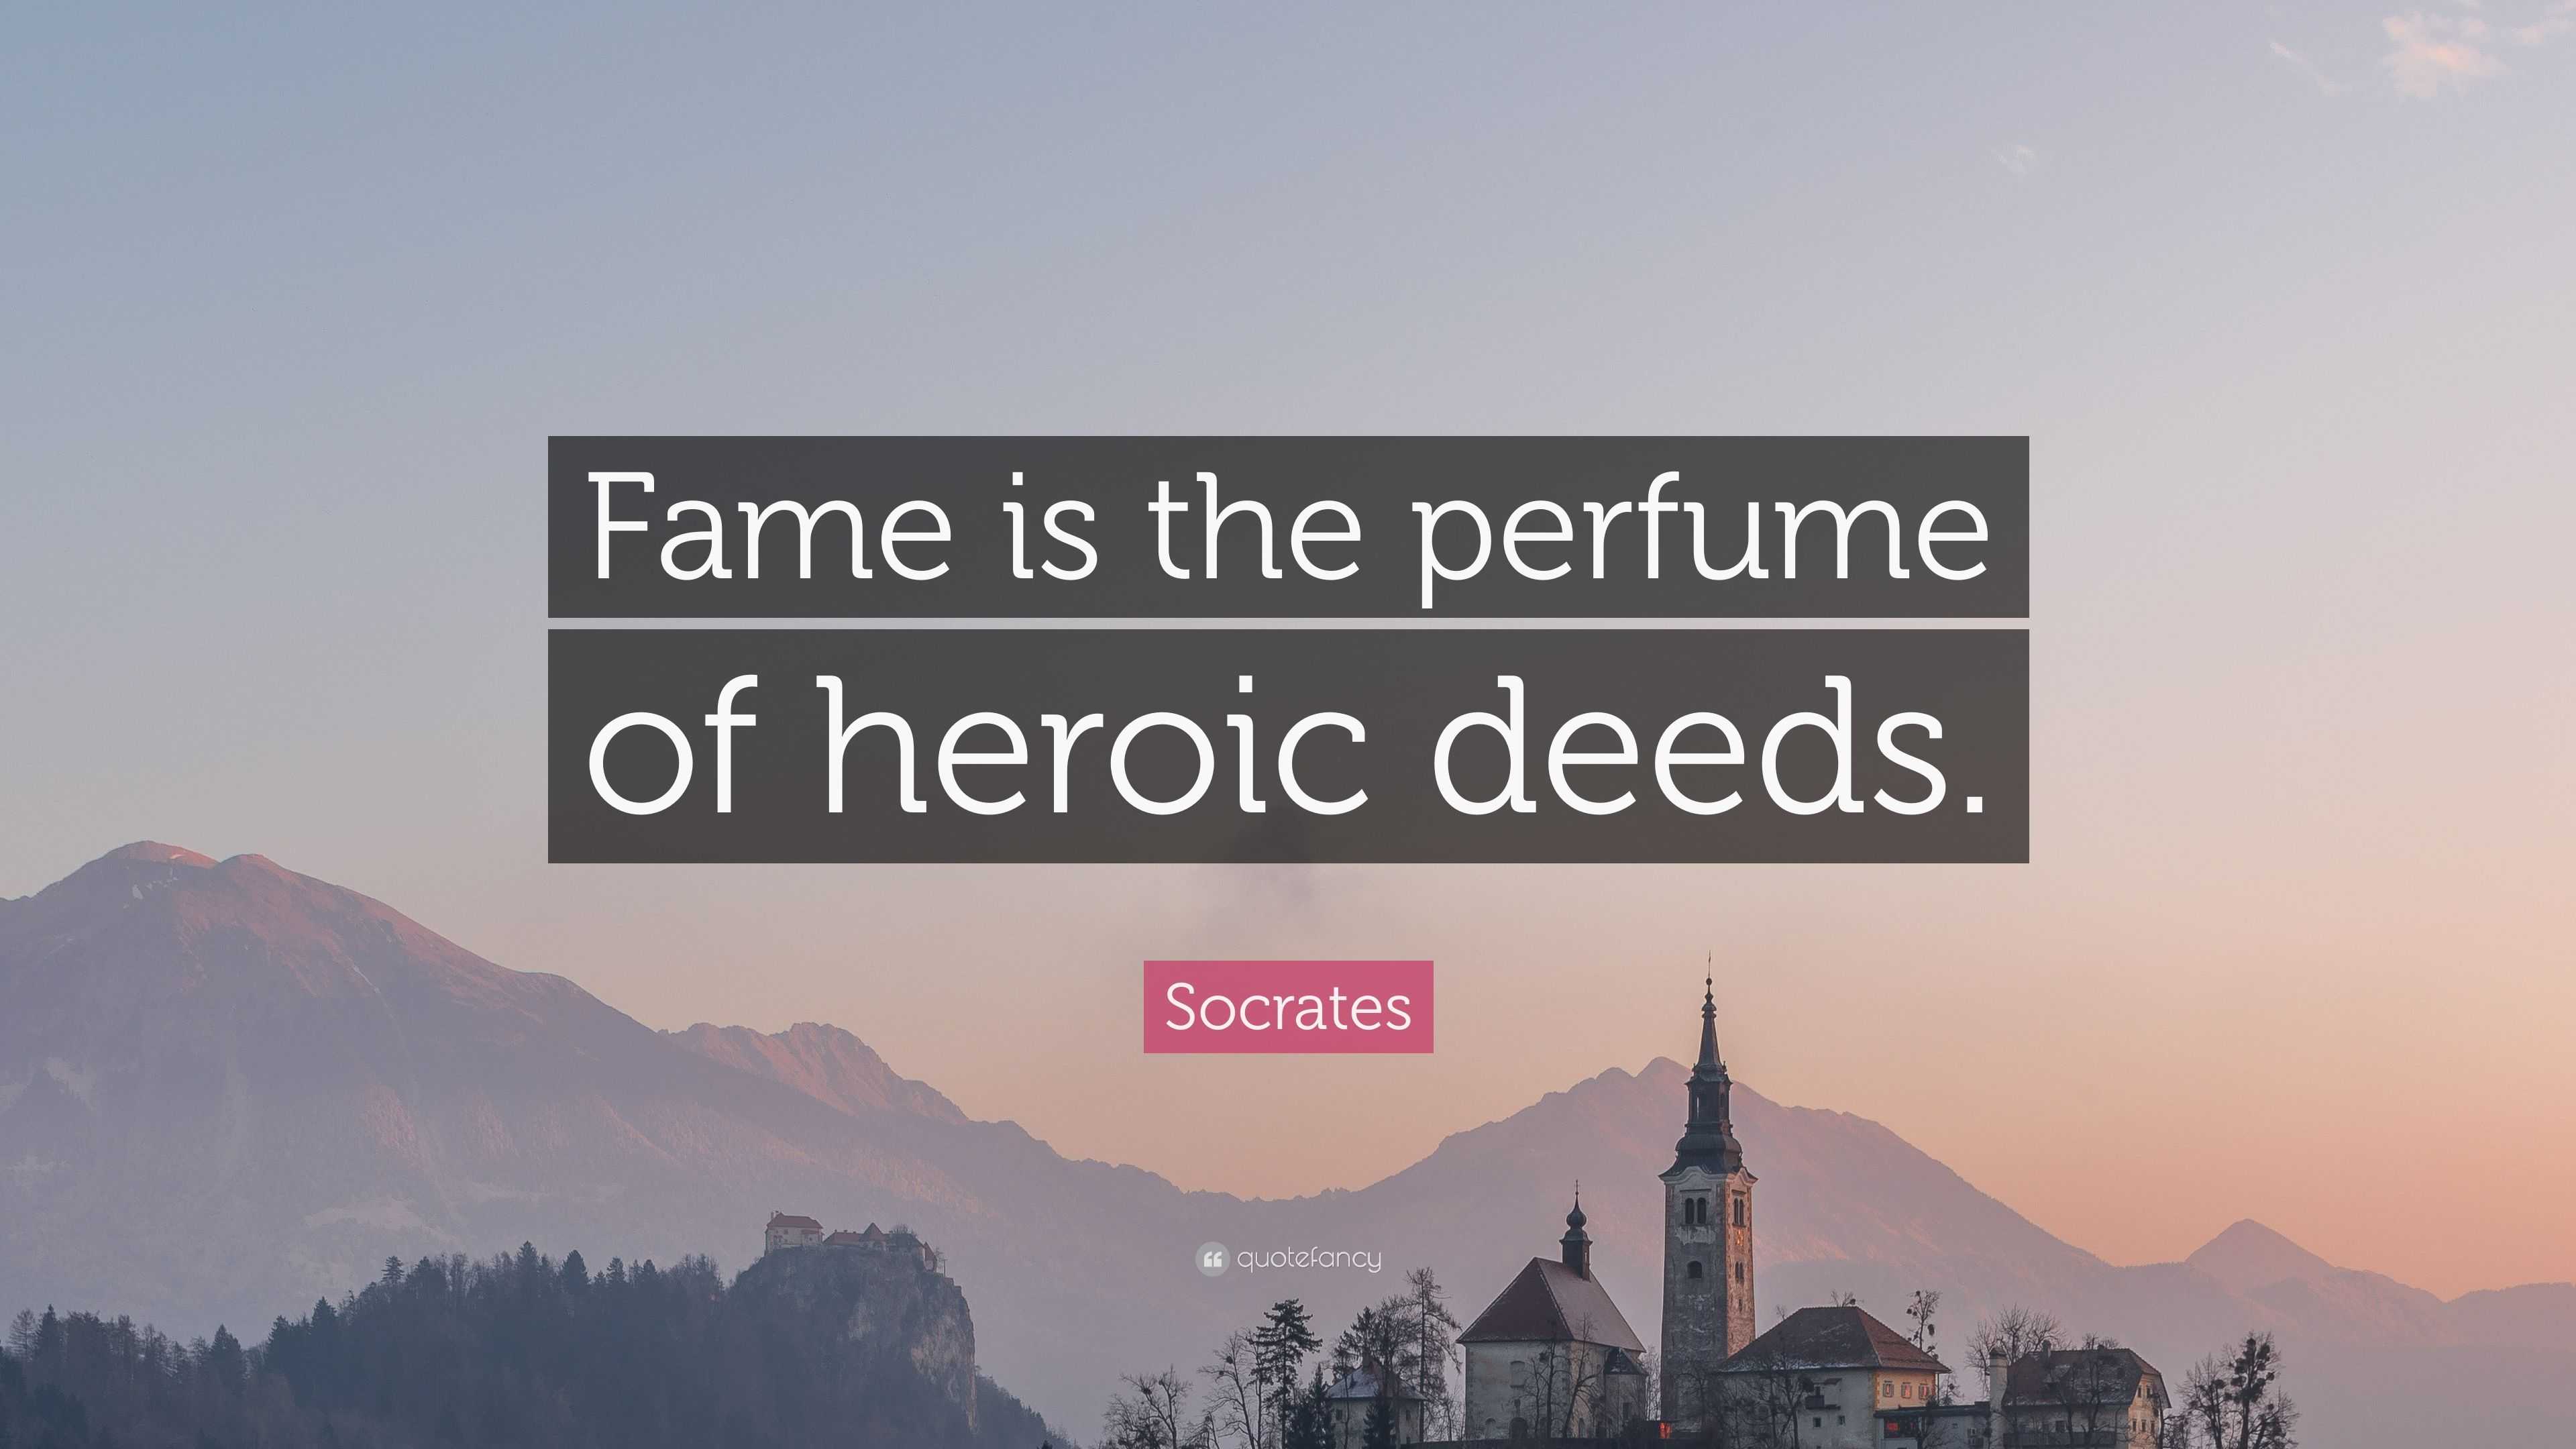 Socrates Quote: “Fame is the perfume of heroic deeds.”